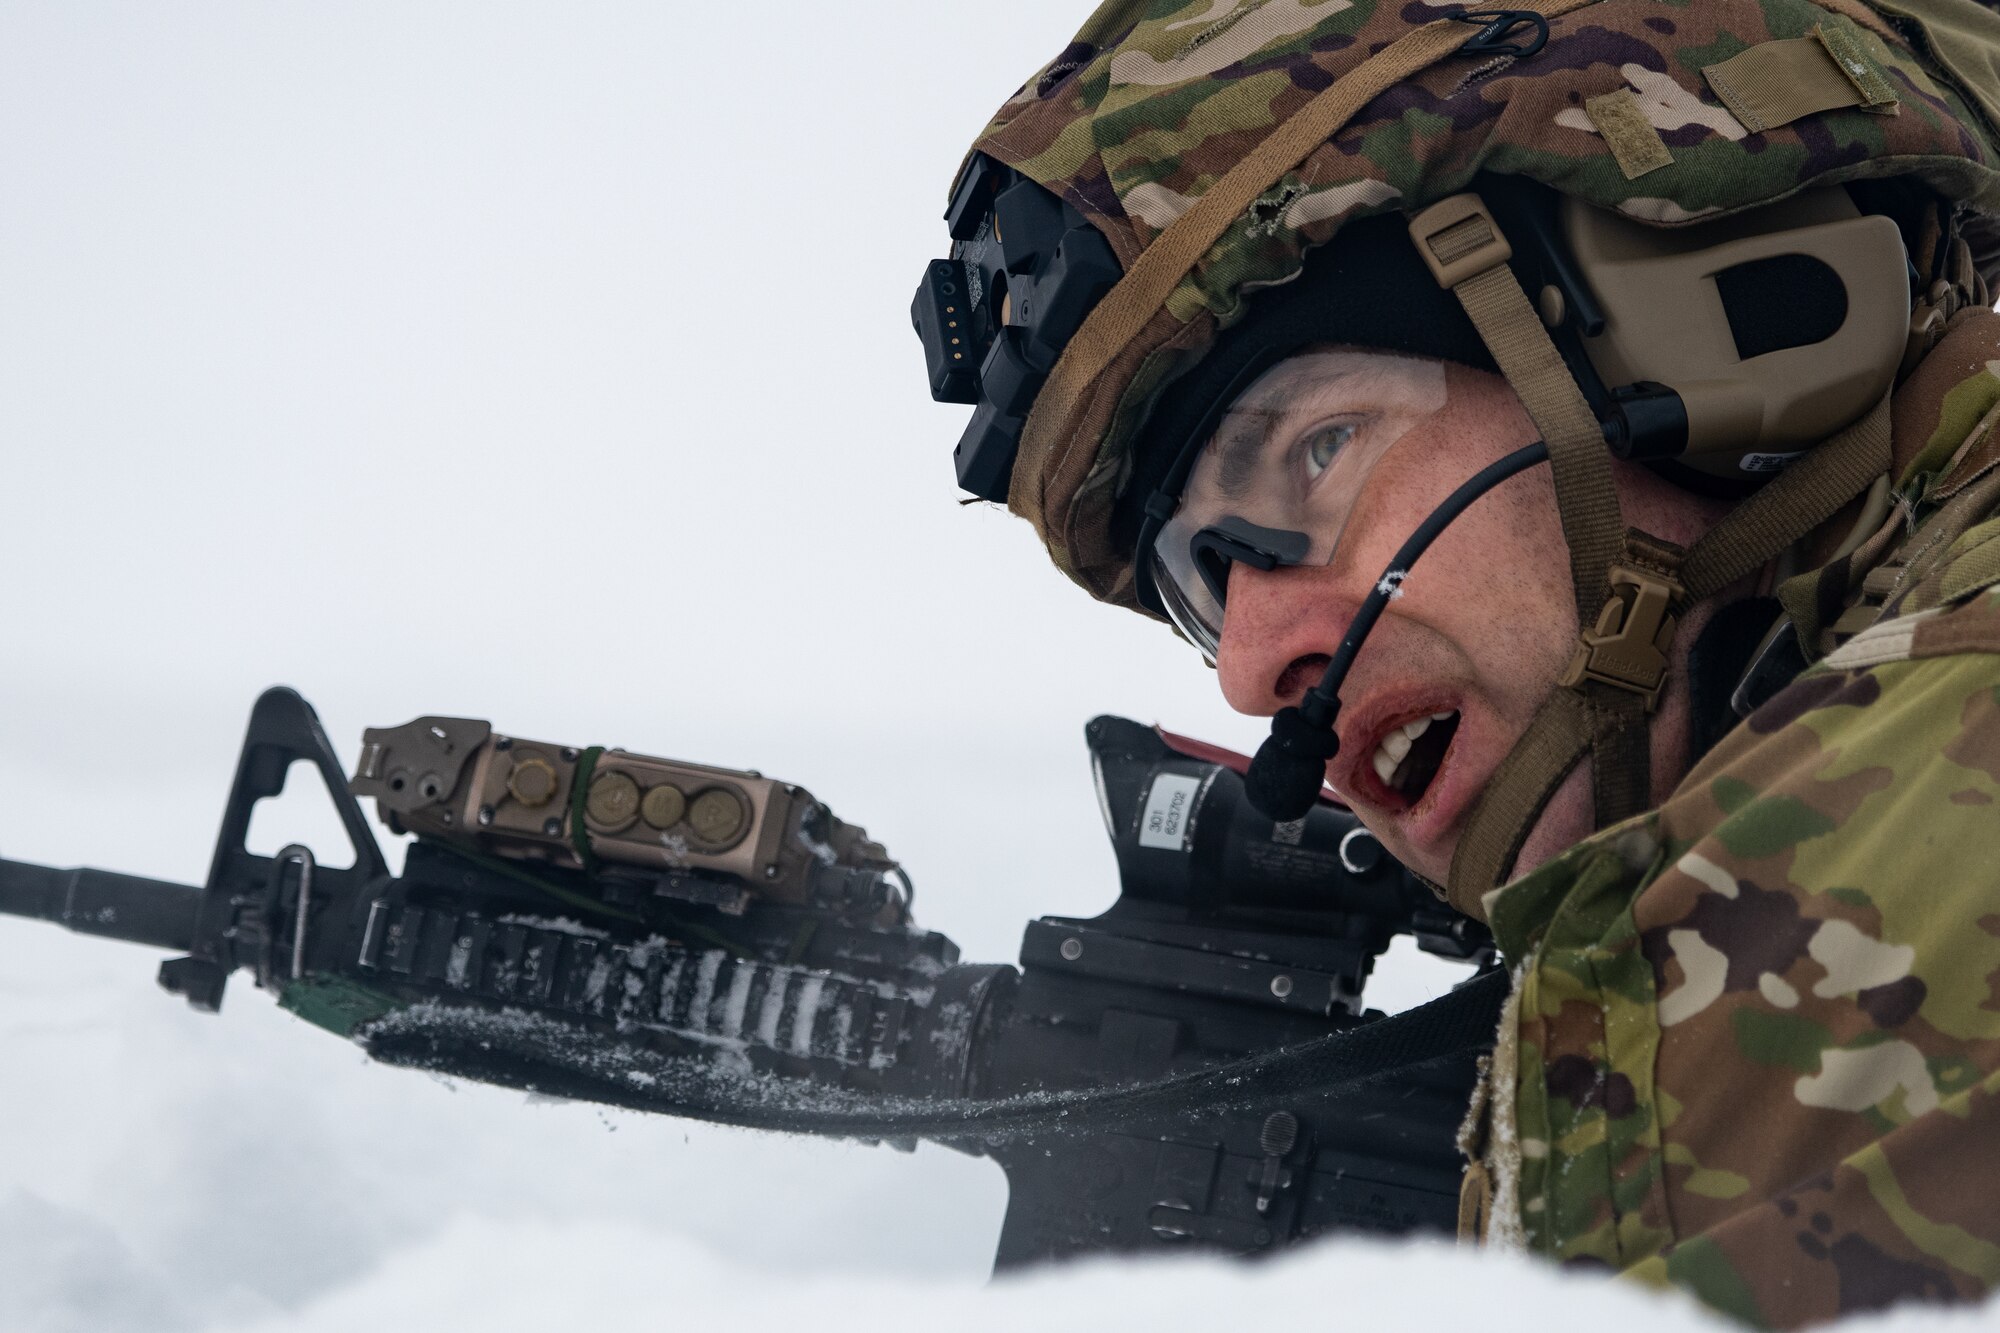 A photo of a soldier prone in the snow